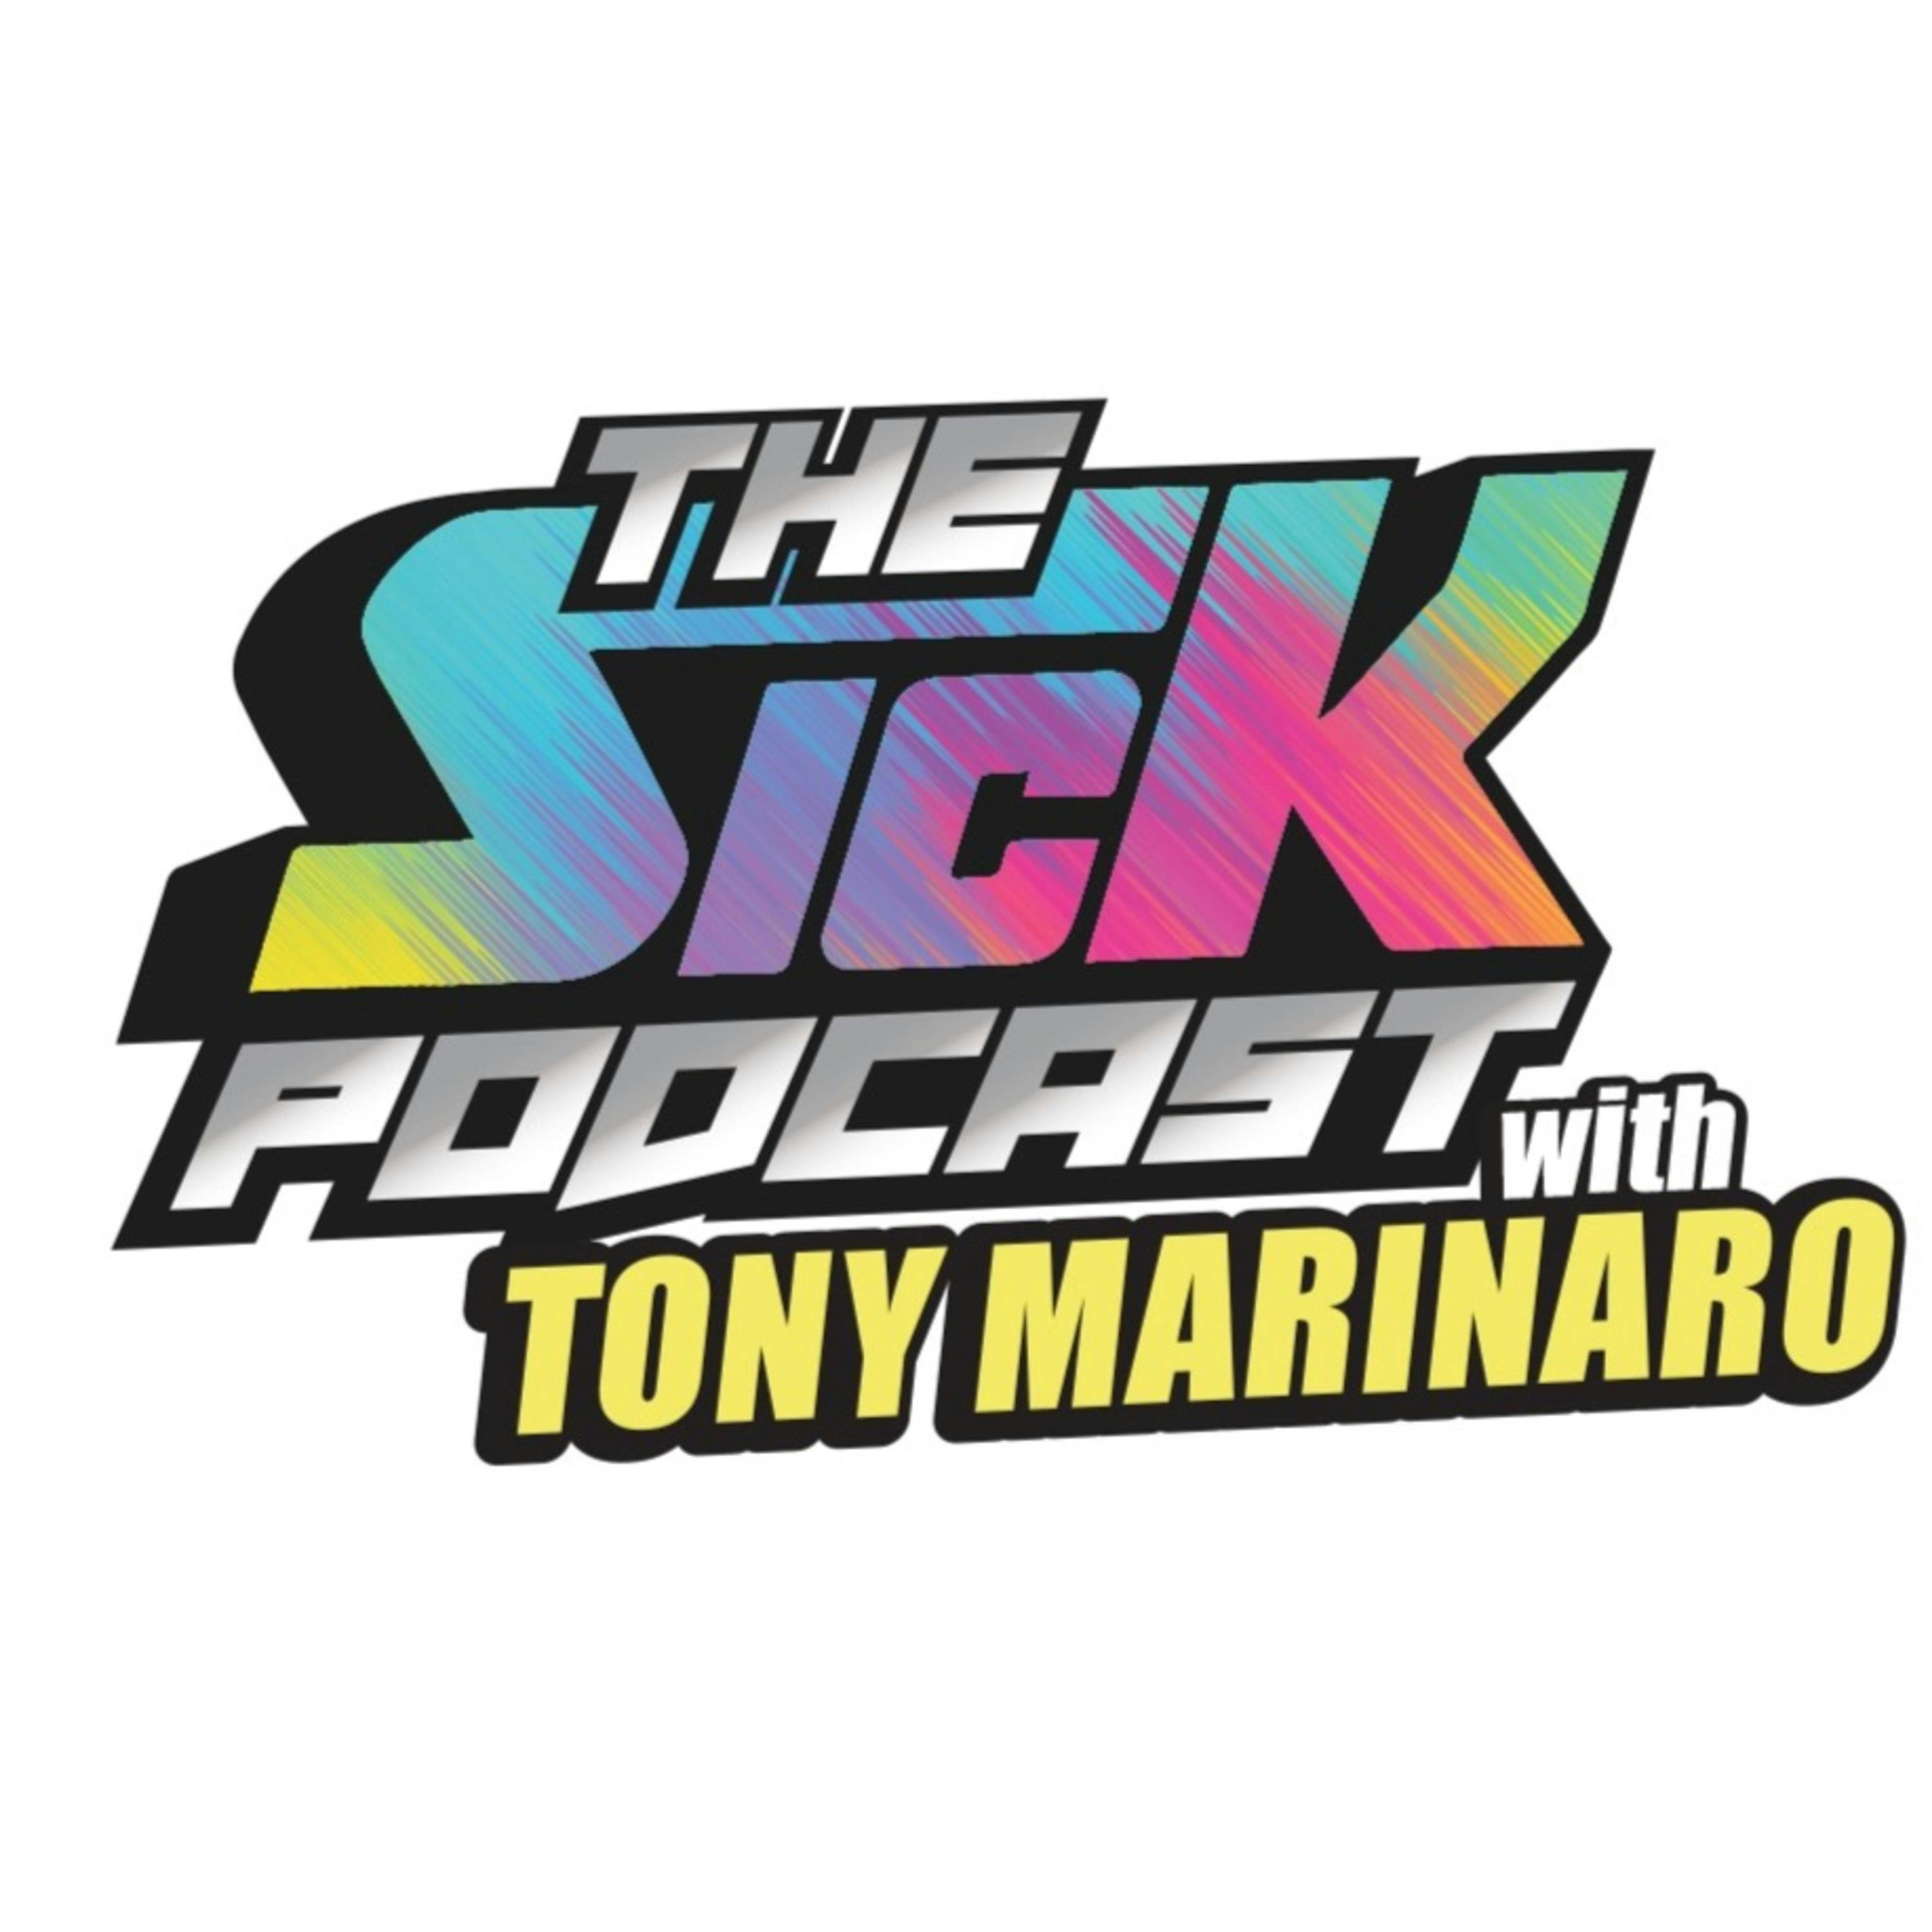 Habs Week In Review, NFL Playoffs & More! | The Sick Podcast with Matt Ohayon January 13 2023